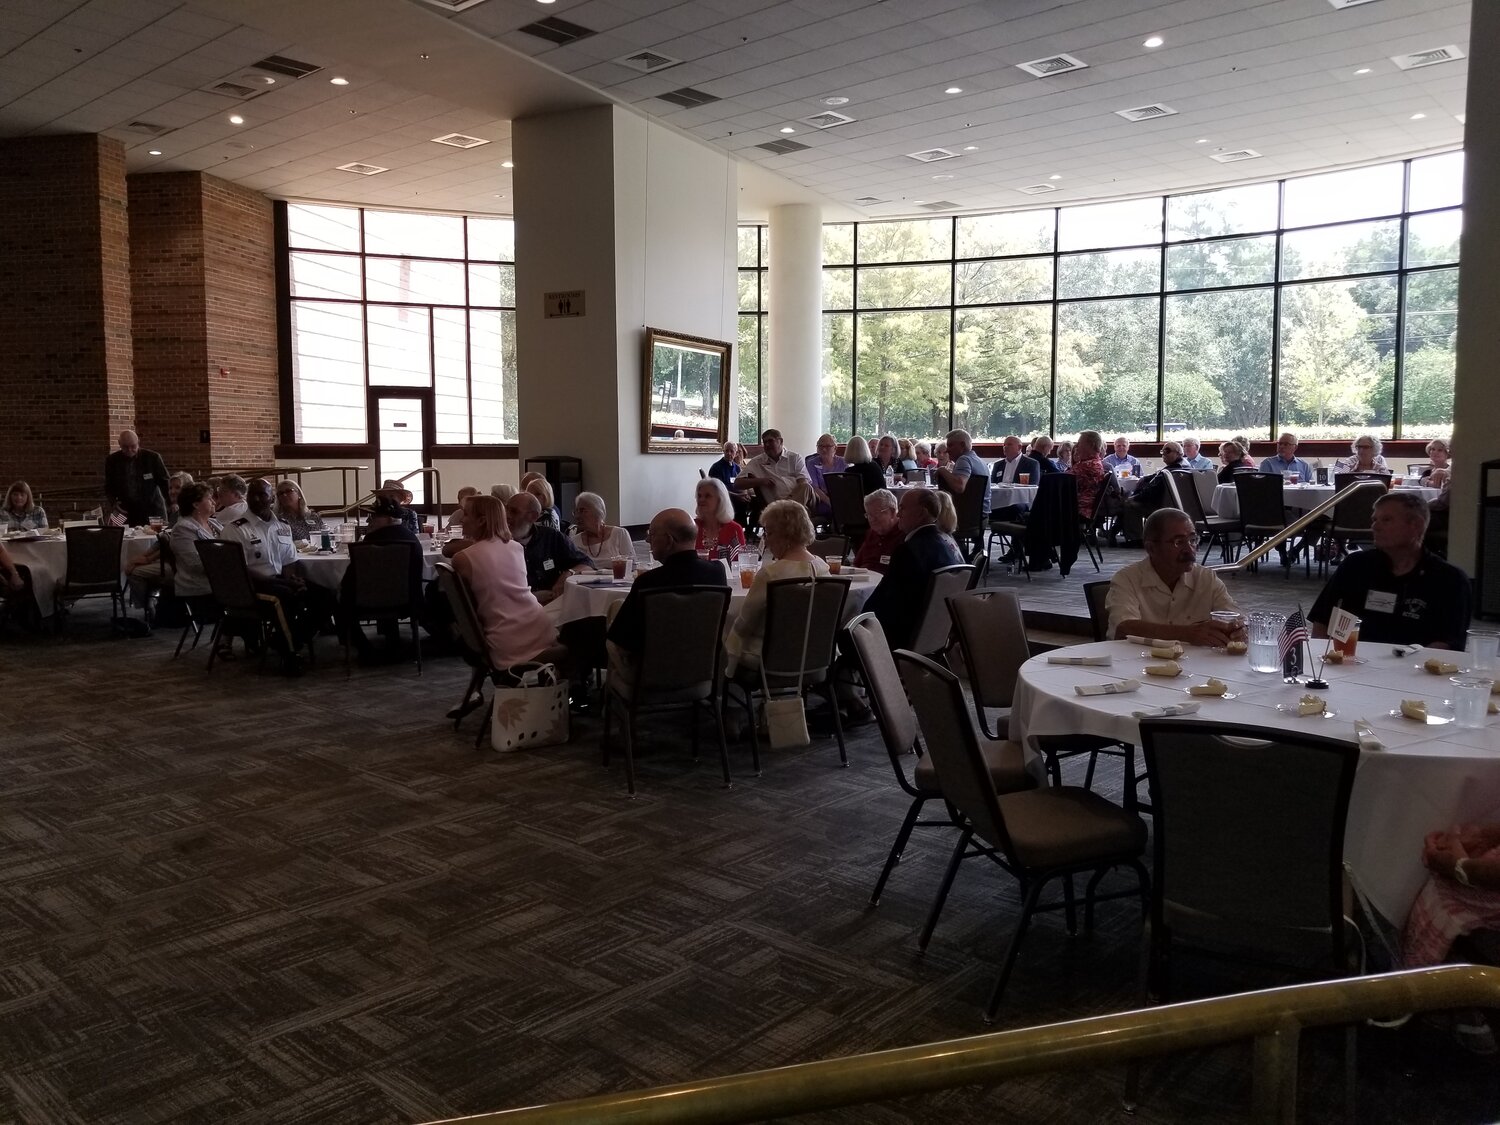 This gathering marked the first time that all three MOAA chapters from Baldwin County, Mobile and Pensacola came together. Participants included representatives from Alabama and Florida as well as National MOAA representatives from Texas and Washington D.C.